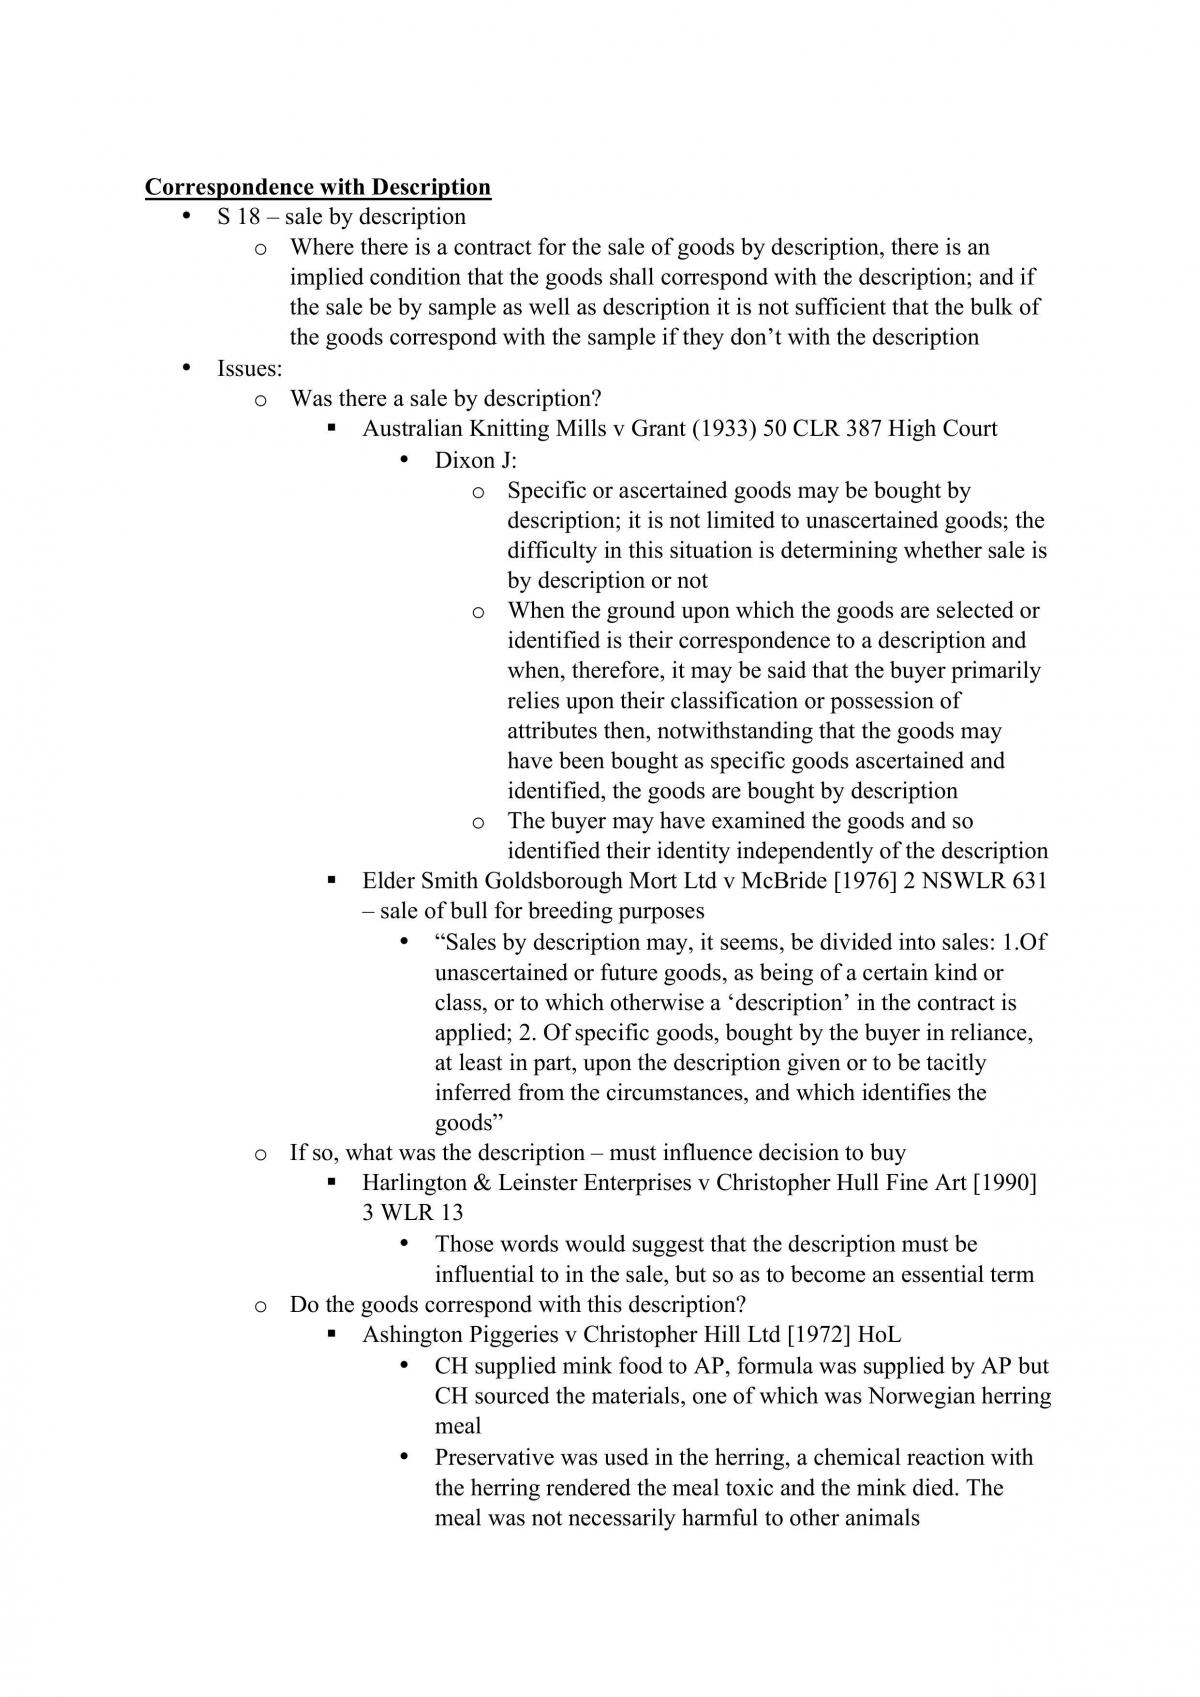 Foundations of Commercial Law Full Course Notes - Page 32